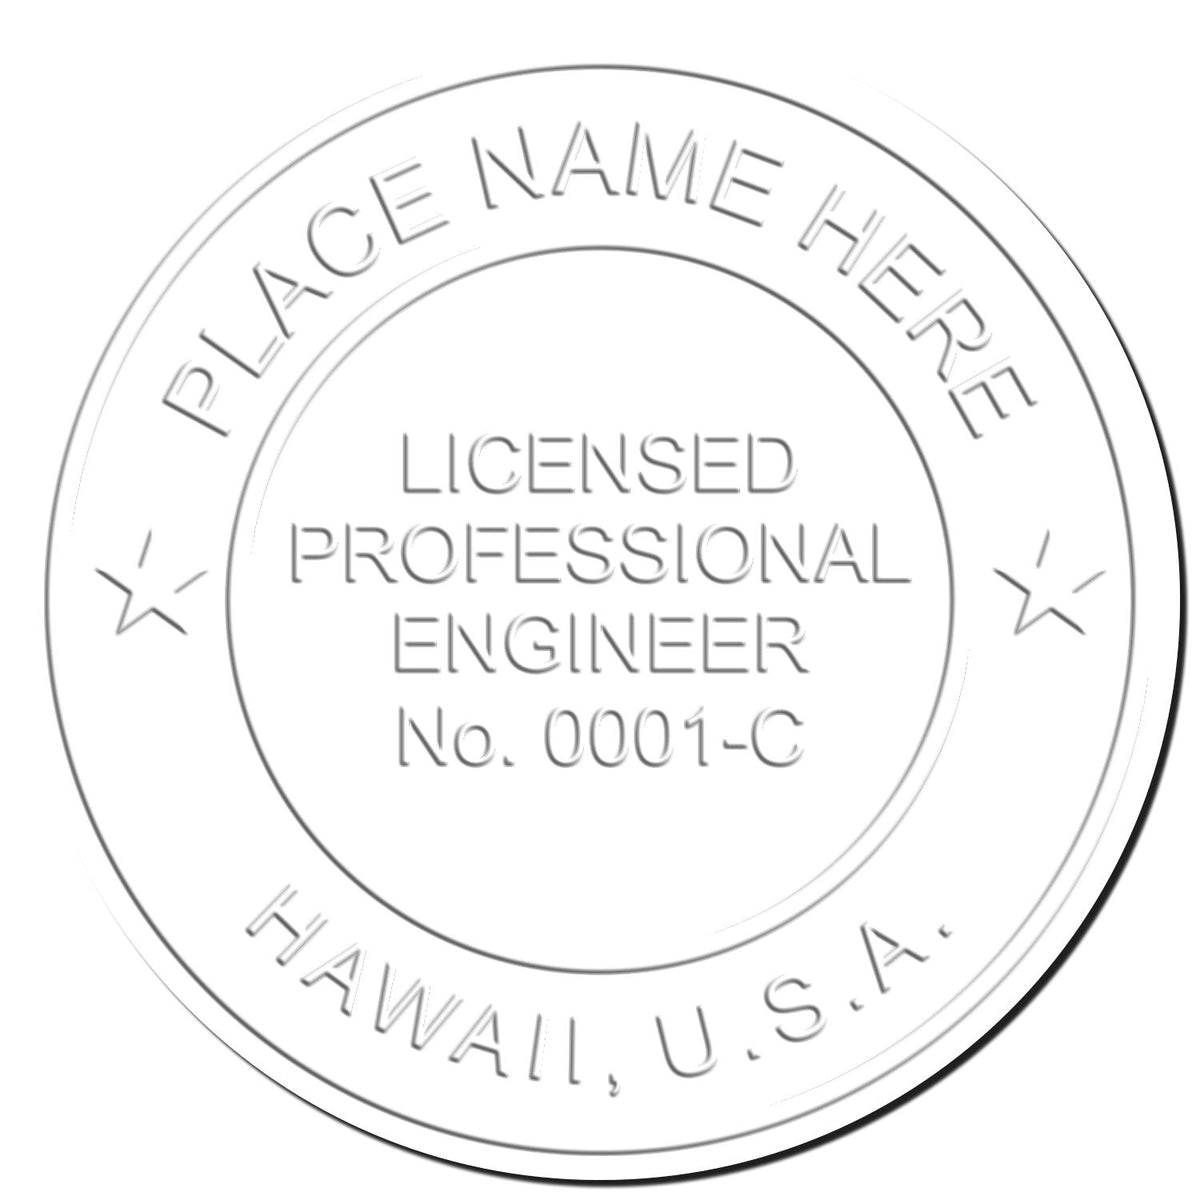 This paper is stamped with a sample imprint of the Gift Hawaii Engineer Seal, signifying its quality and reliability.